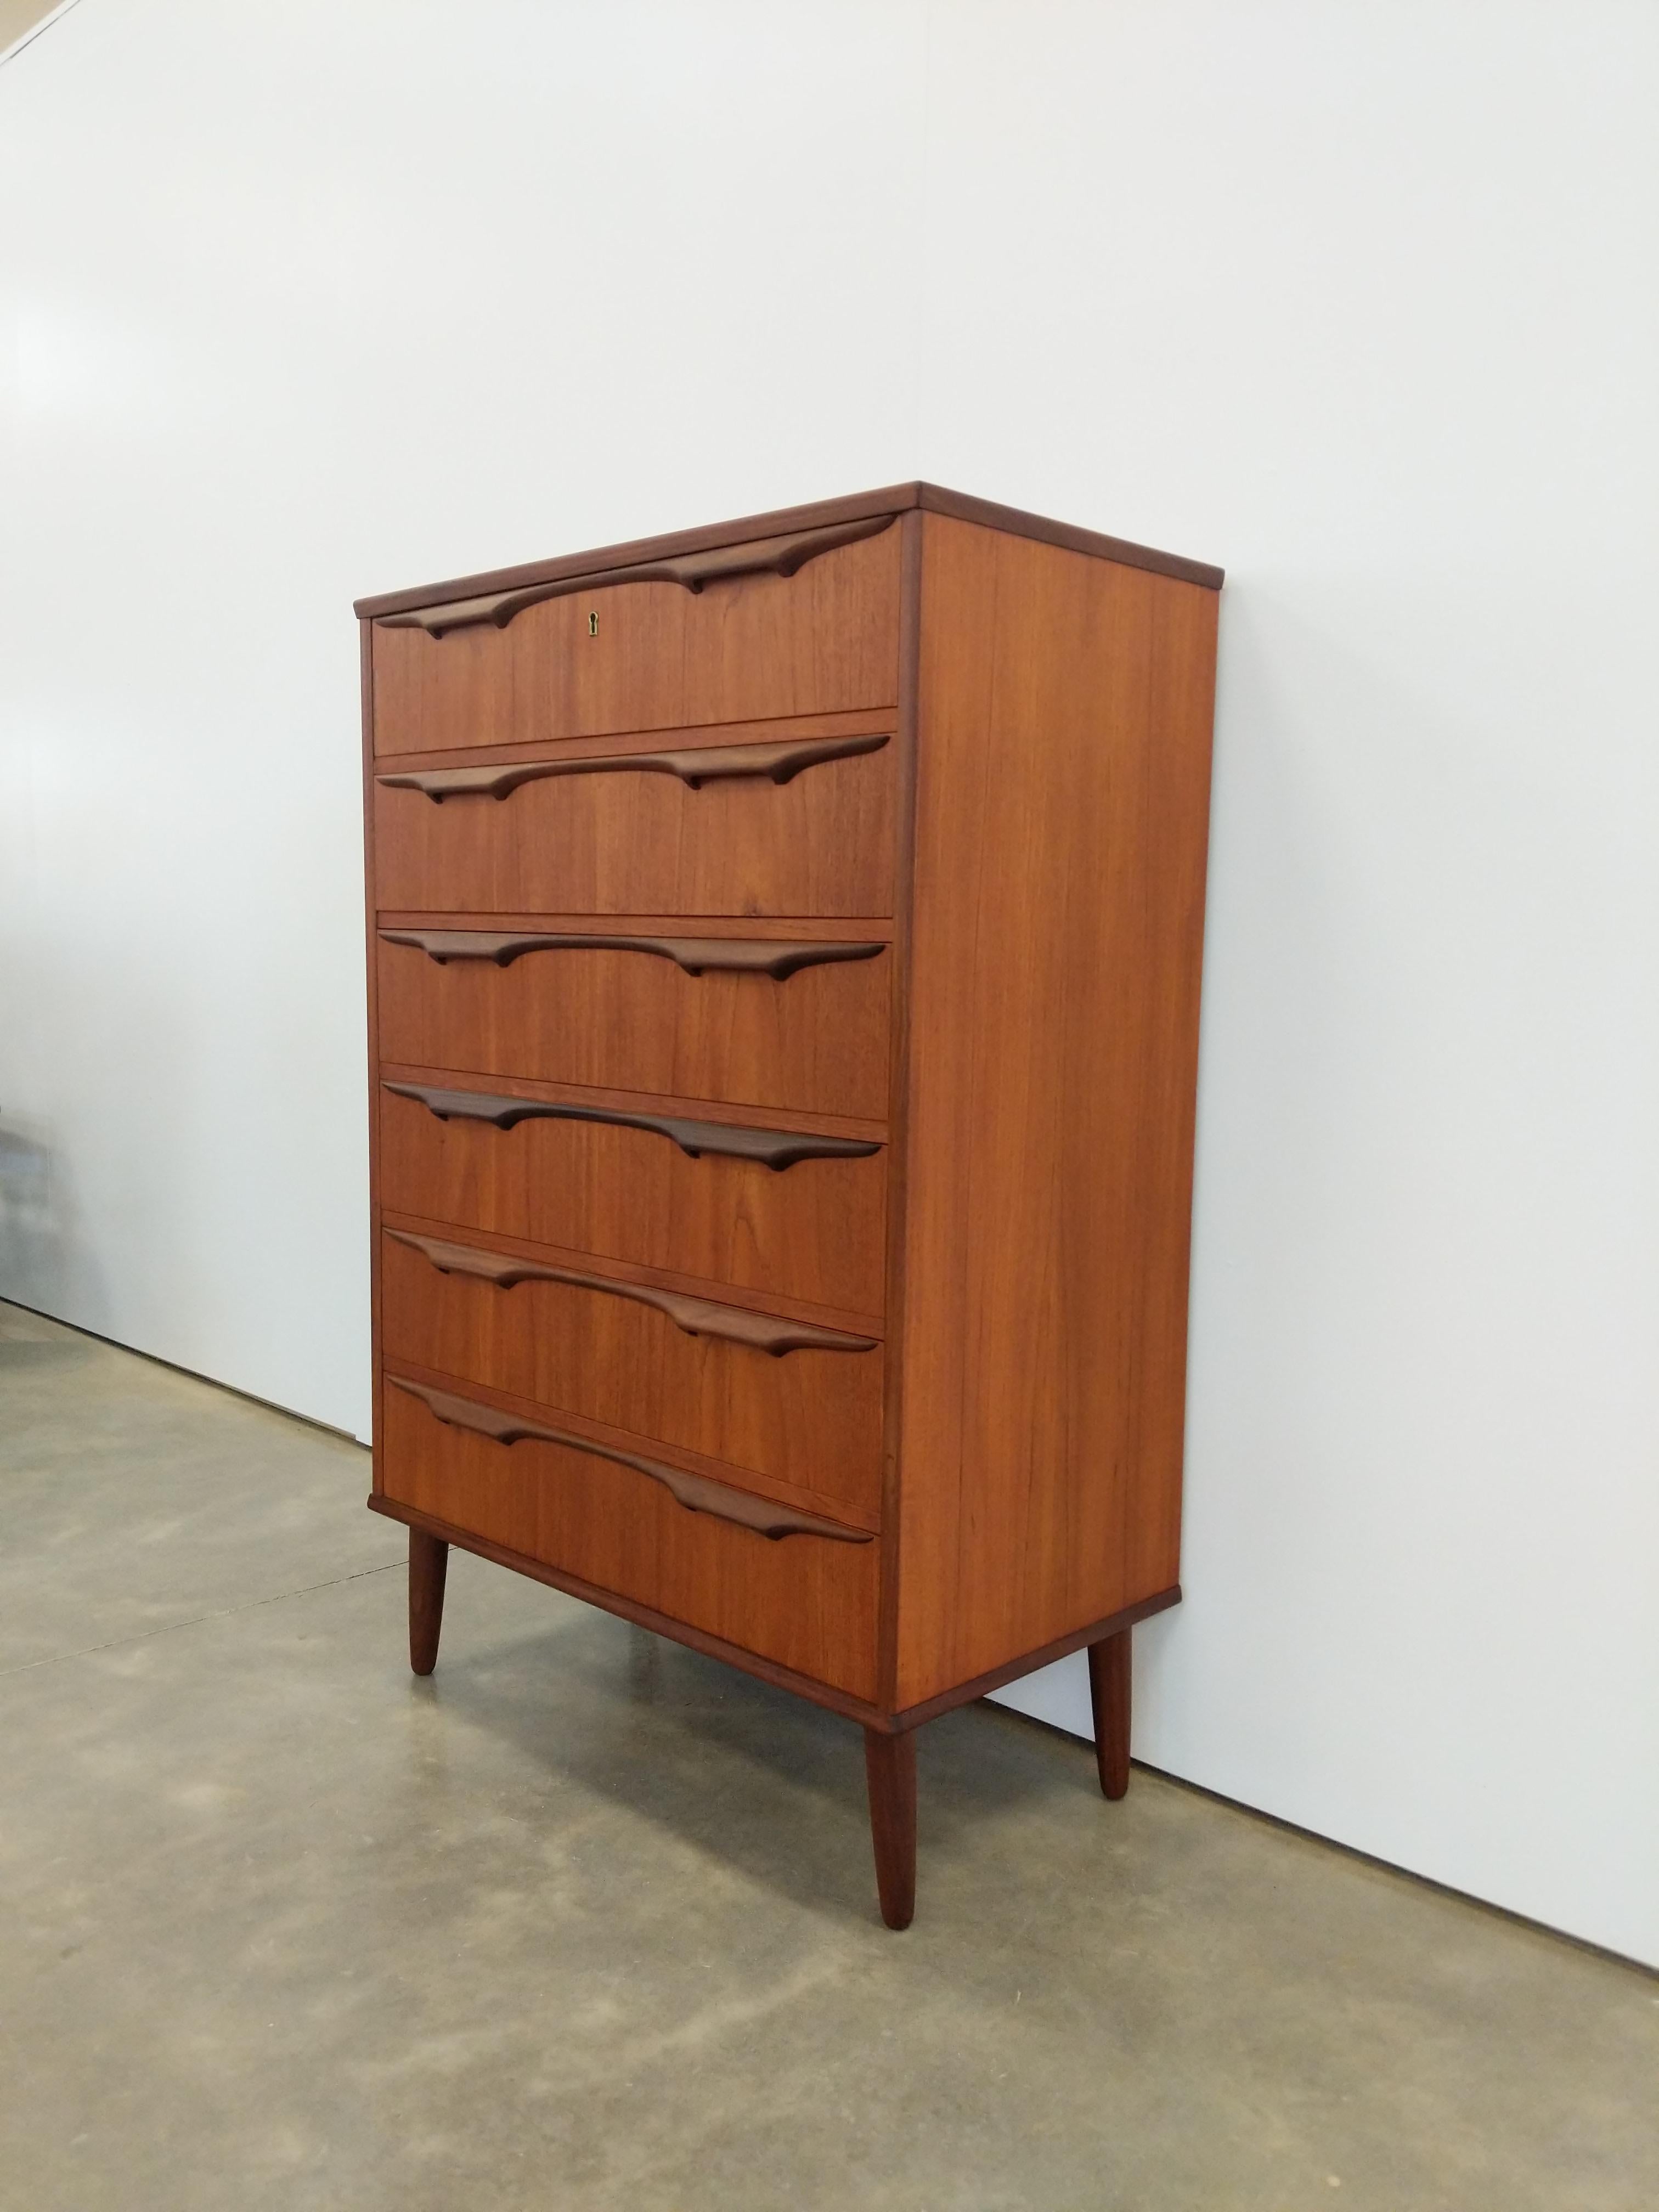 Authentic vintage mid century Danish / Scandinavian Modern teak dresser / chest of drawers.

By Trekanten.

This piece is in excellent refinished condition overall with few signs of age-related wear (see photos).

If you would like any additional